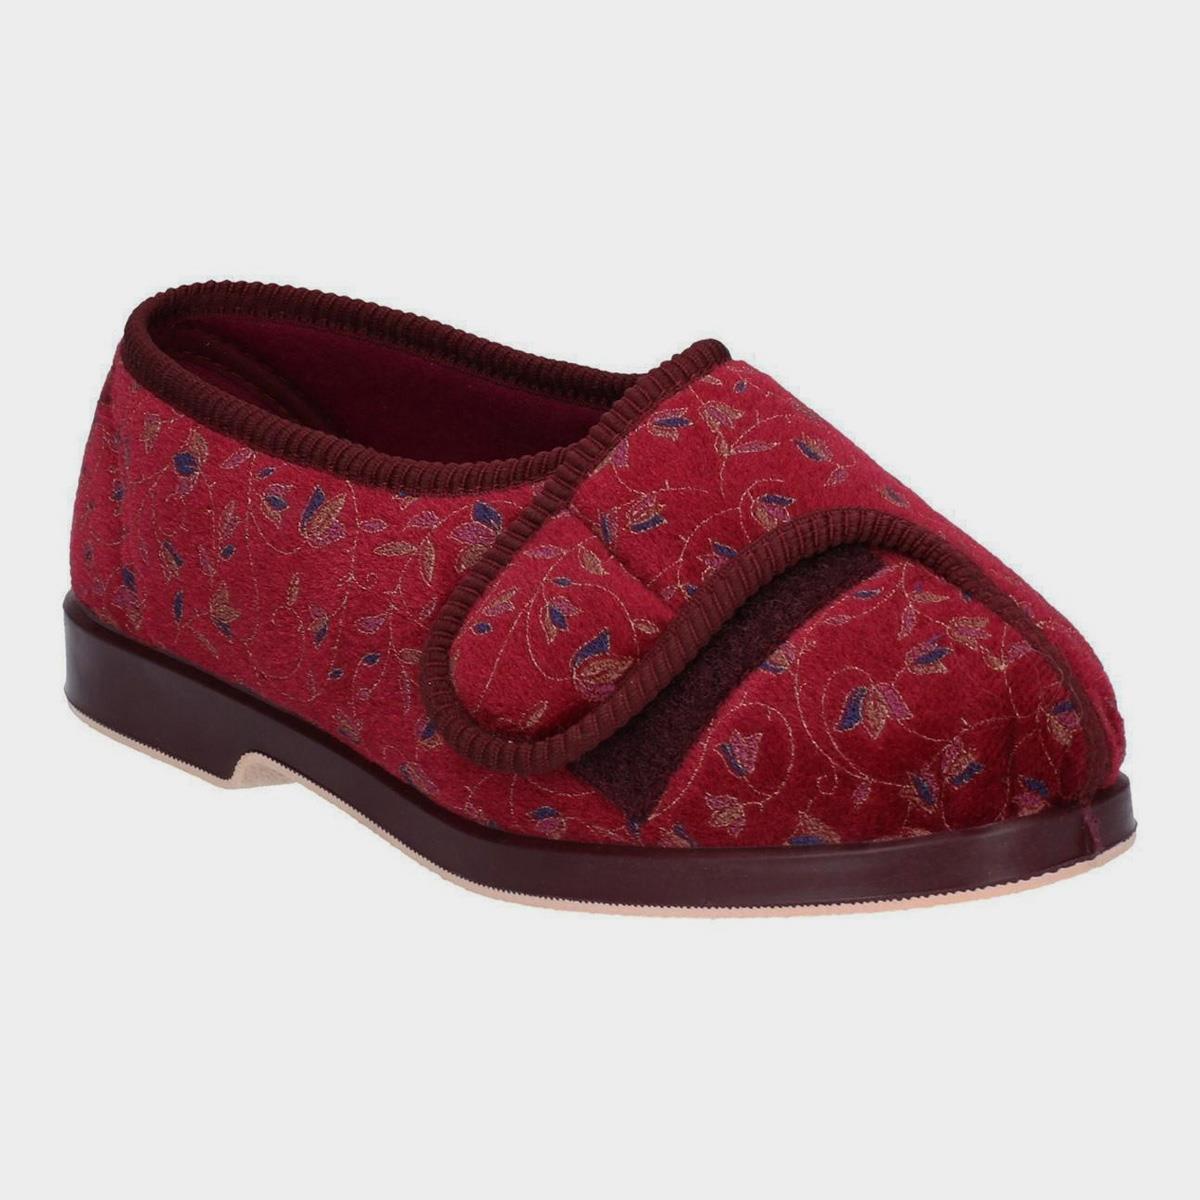 GBS Womens Nola Extra Wide Fit Slipper in Red-699089 | Shoe Zone